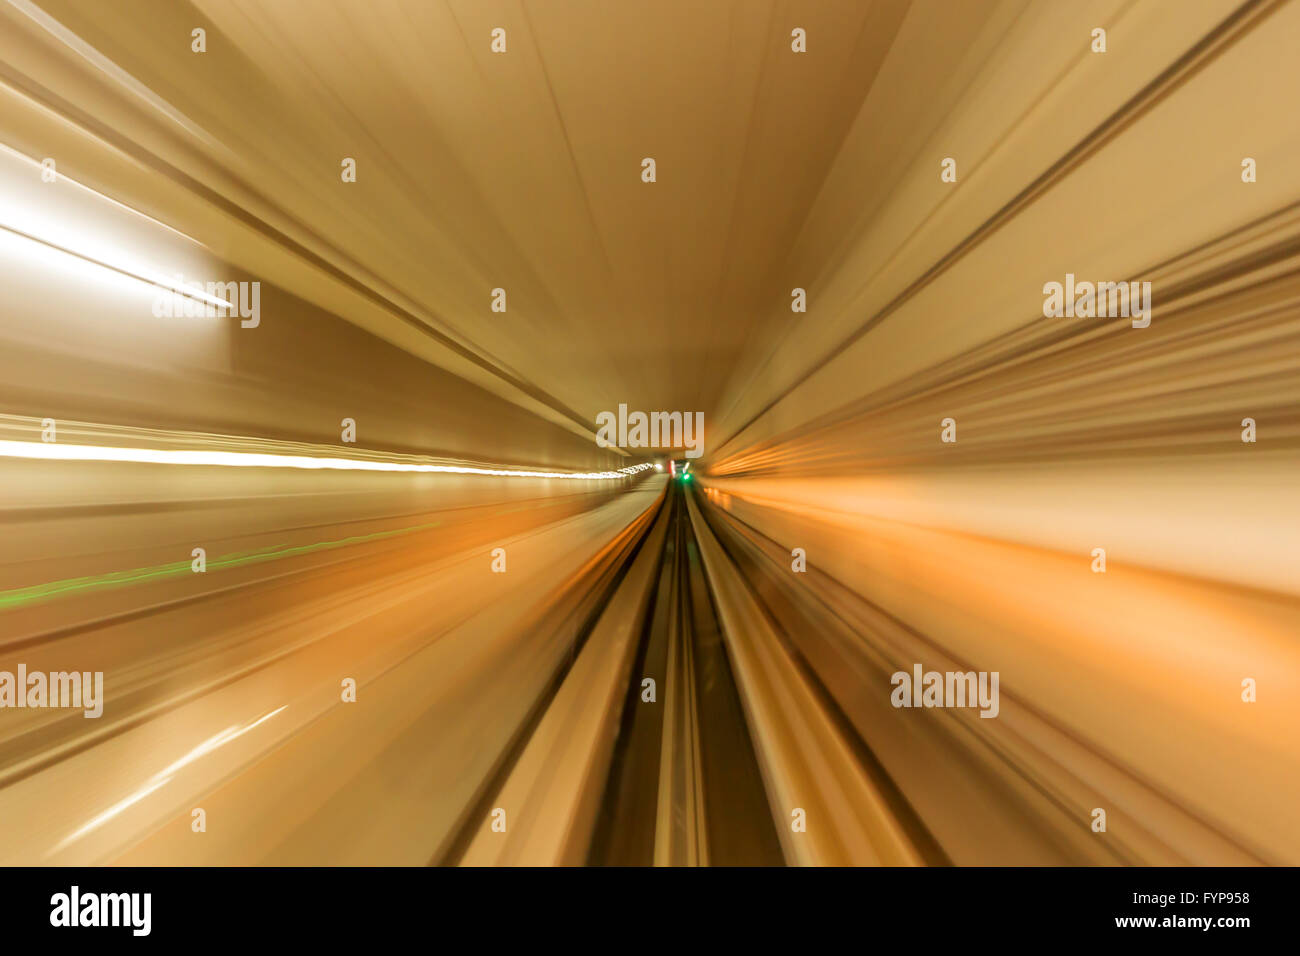 high speed movement in a tunnel Stock Photo